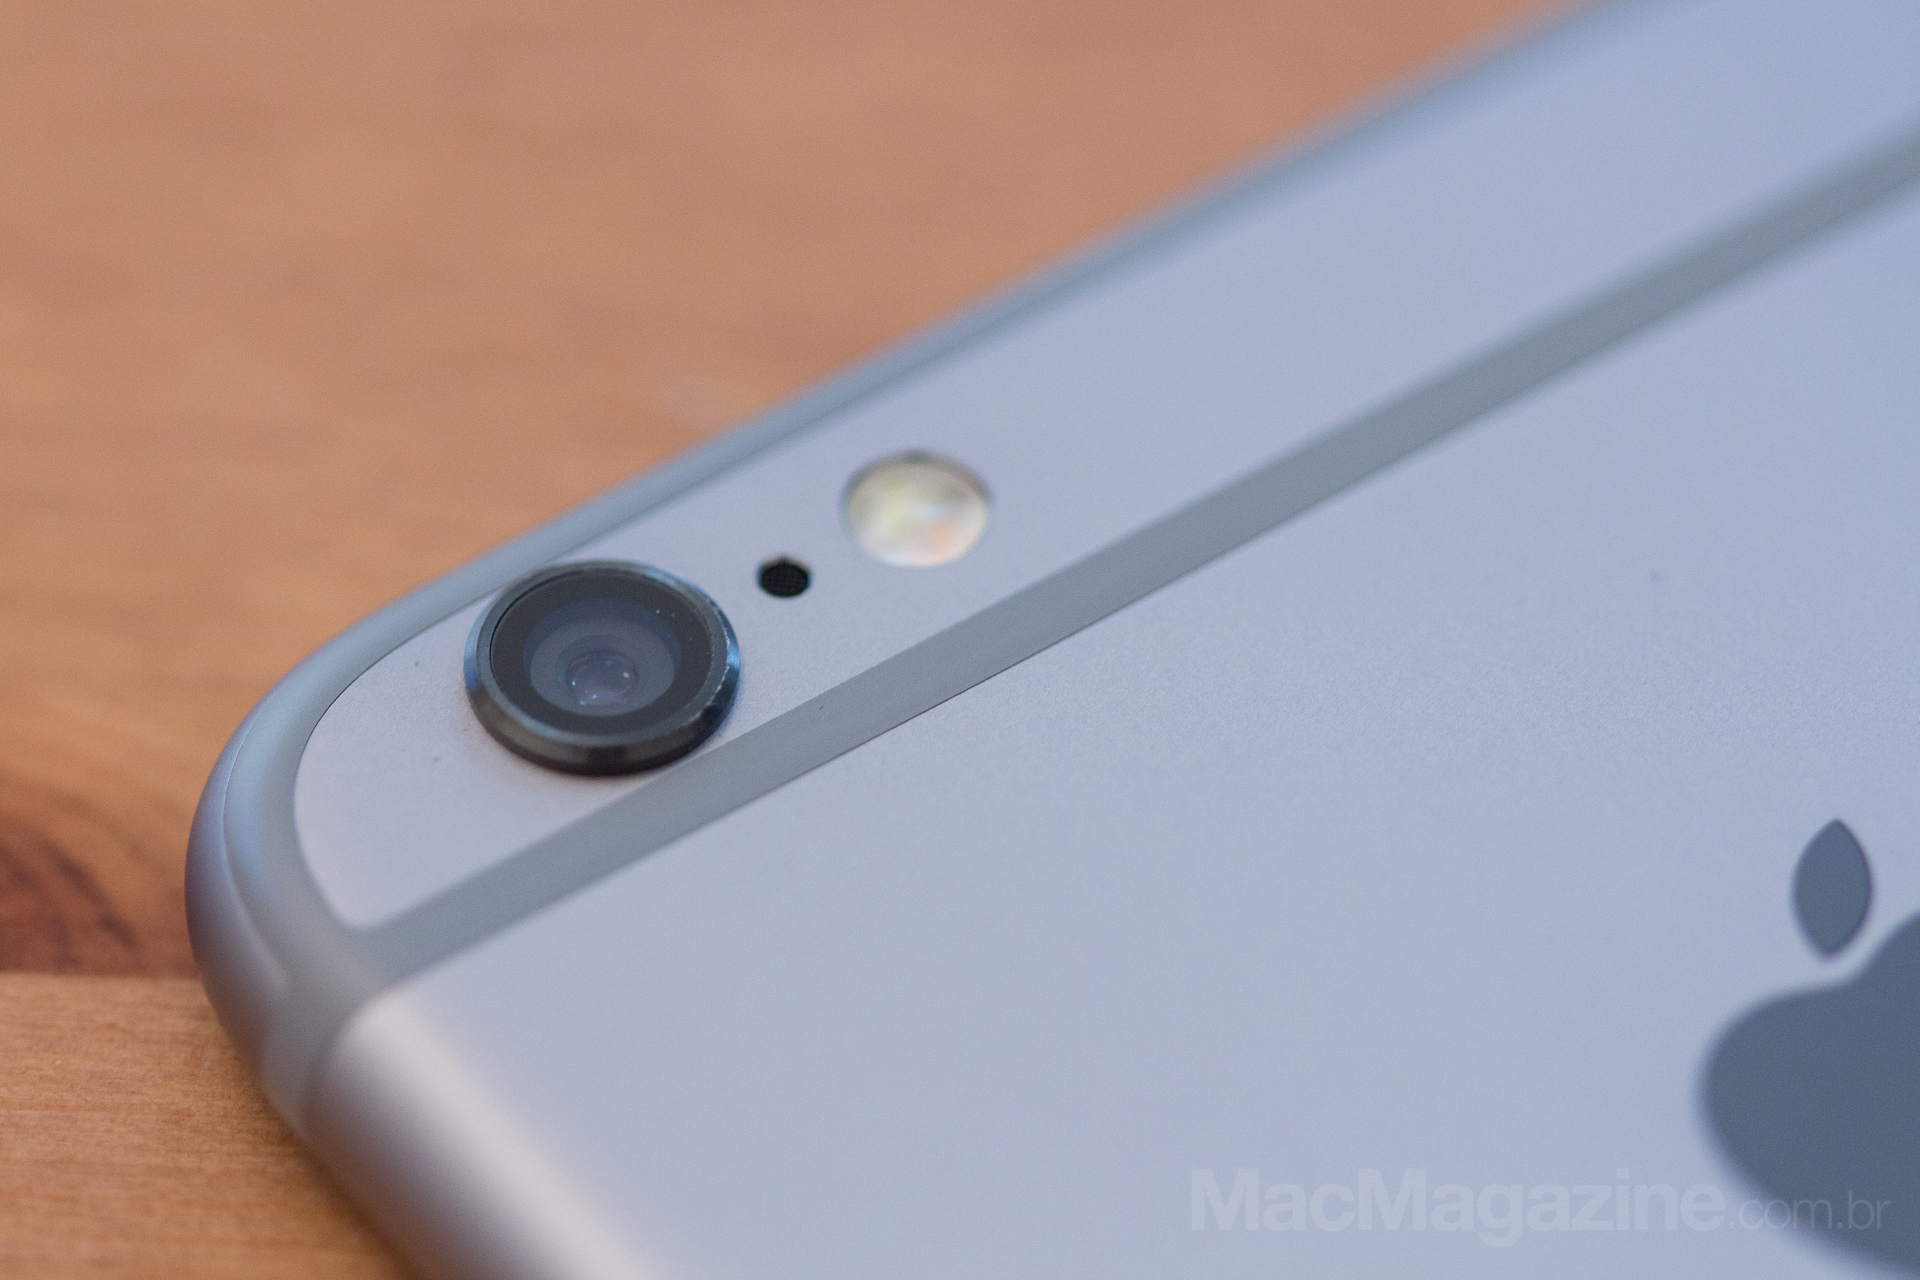 Rumor: “iPhone 6s” cameras will get a nice upgrade (12MP, 4K videos, front flash, etc.)